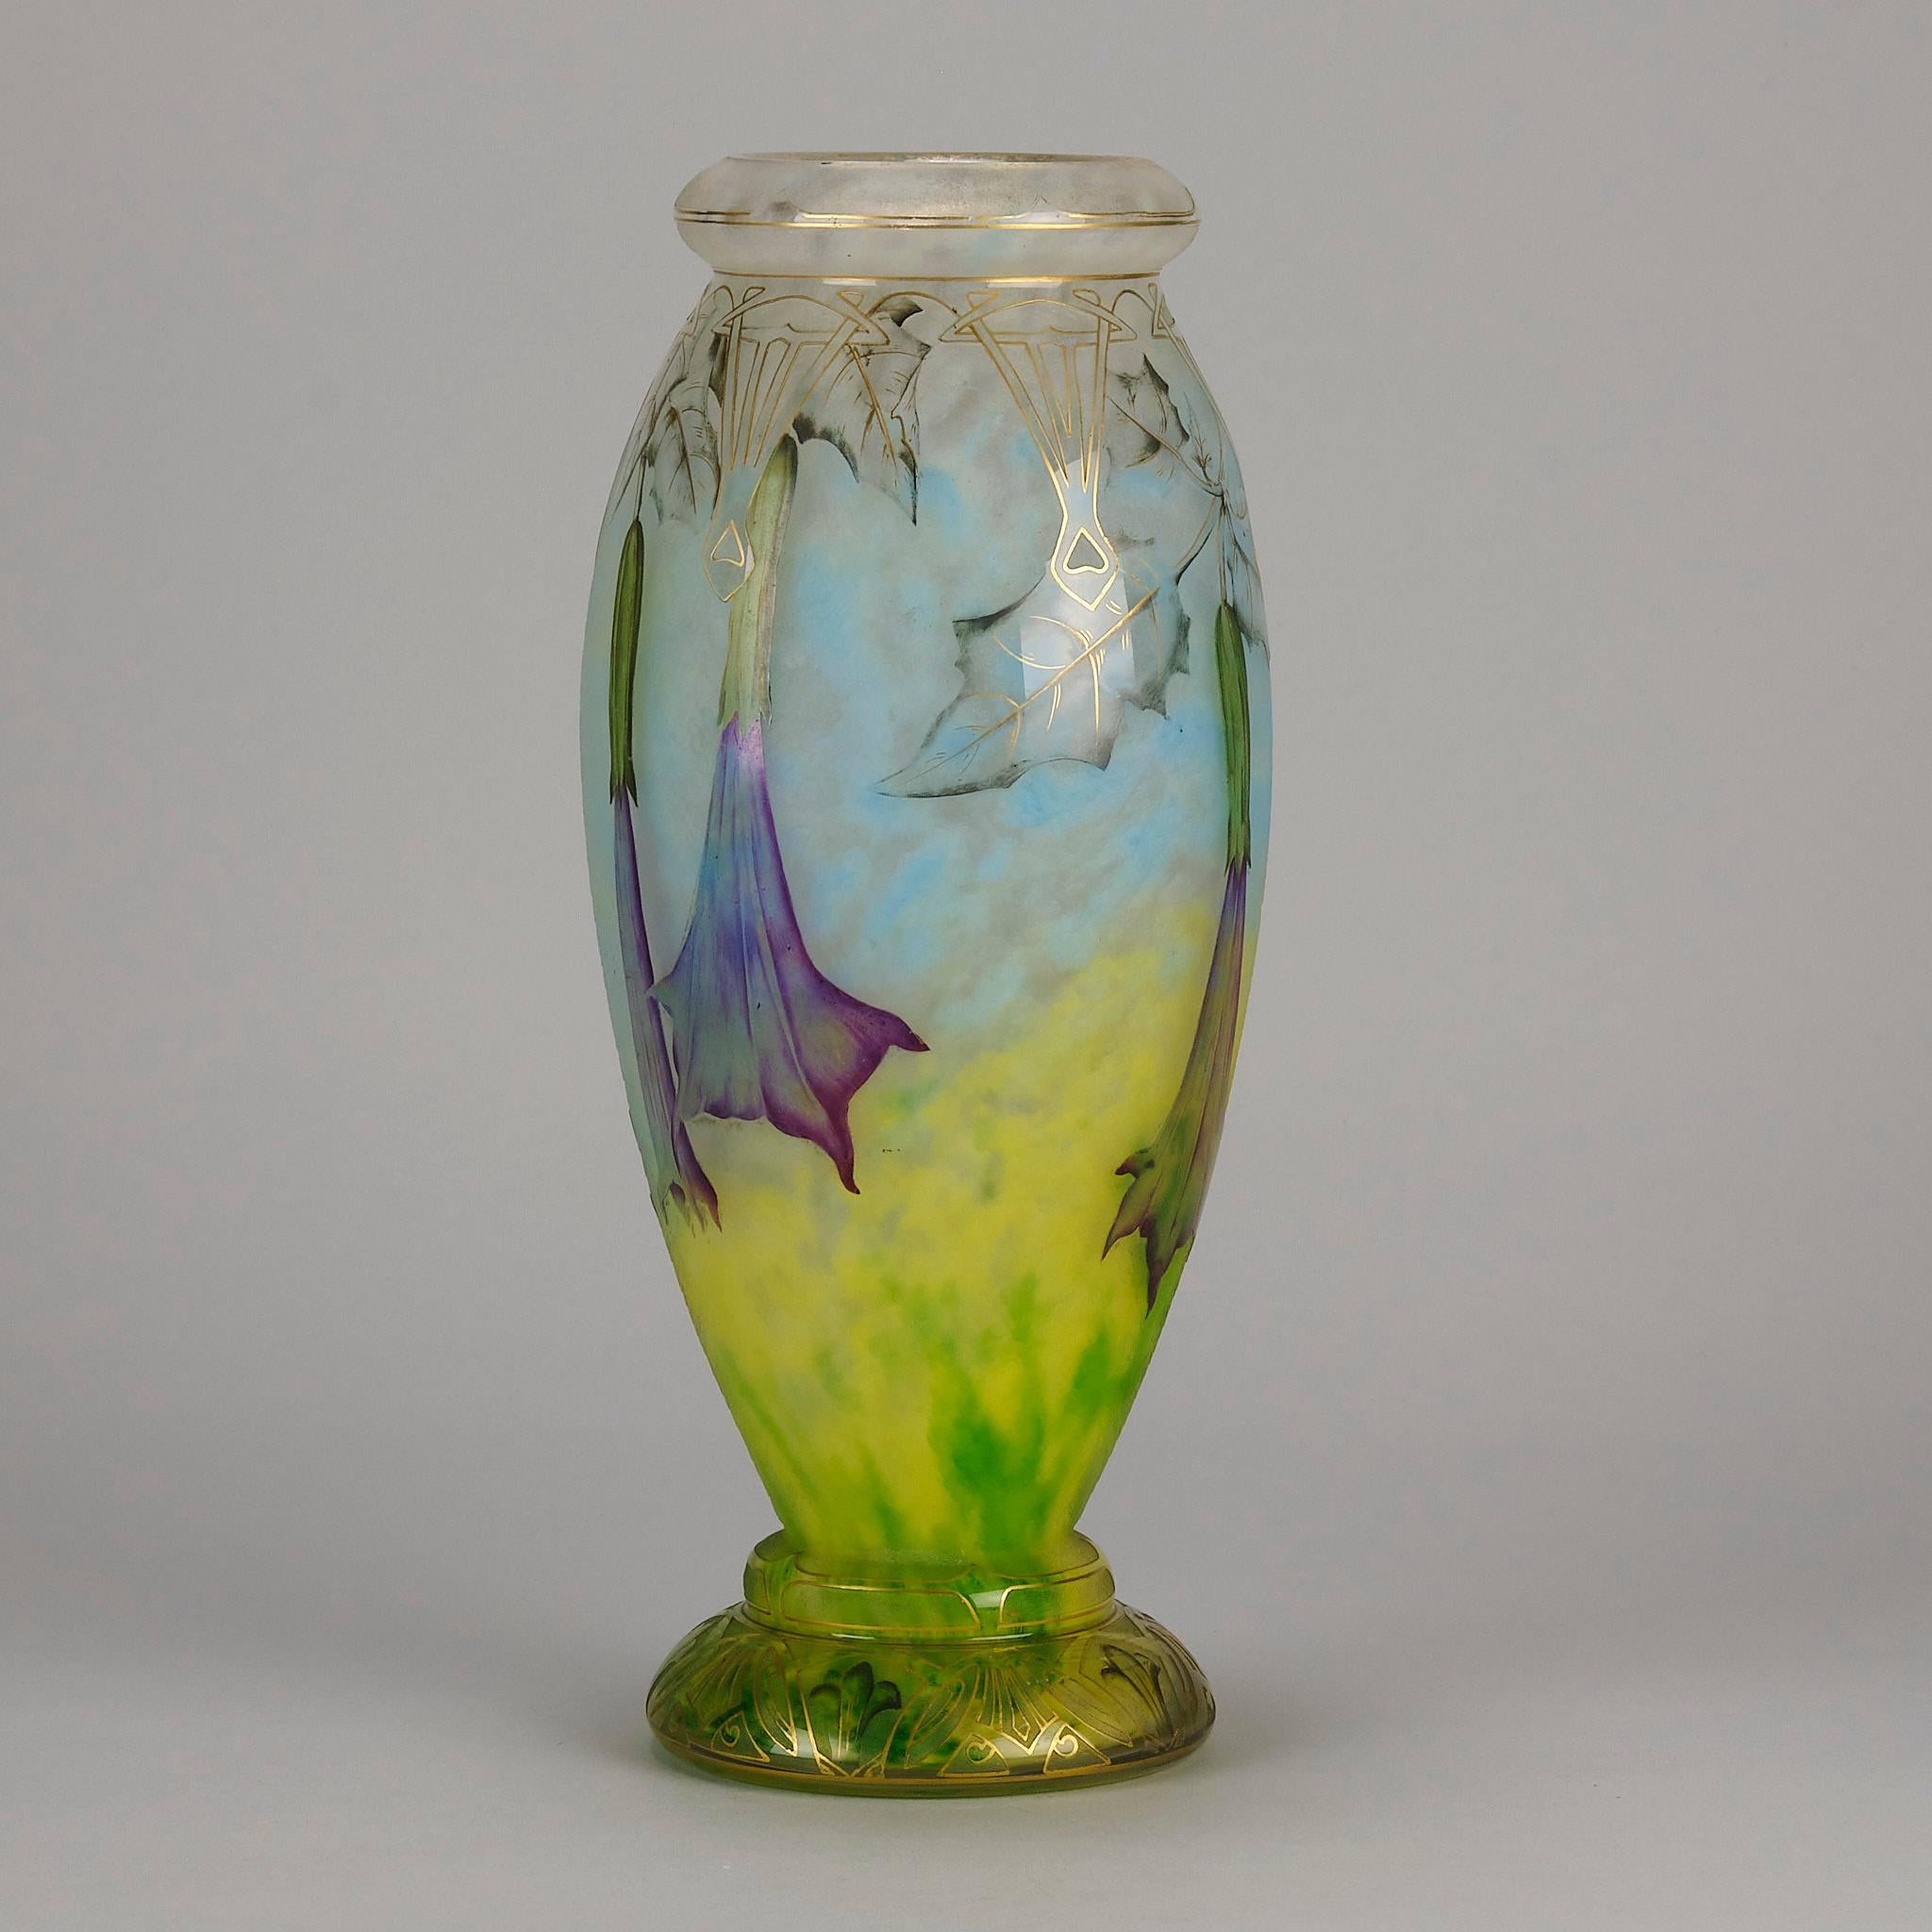 Early 20th Century Art Nouveau Glass Vase entitled “Daturas Vase” by Daum Frères In Excellent Condition For Sale In London, GB